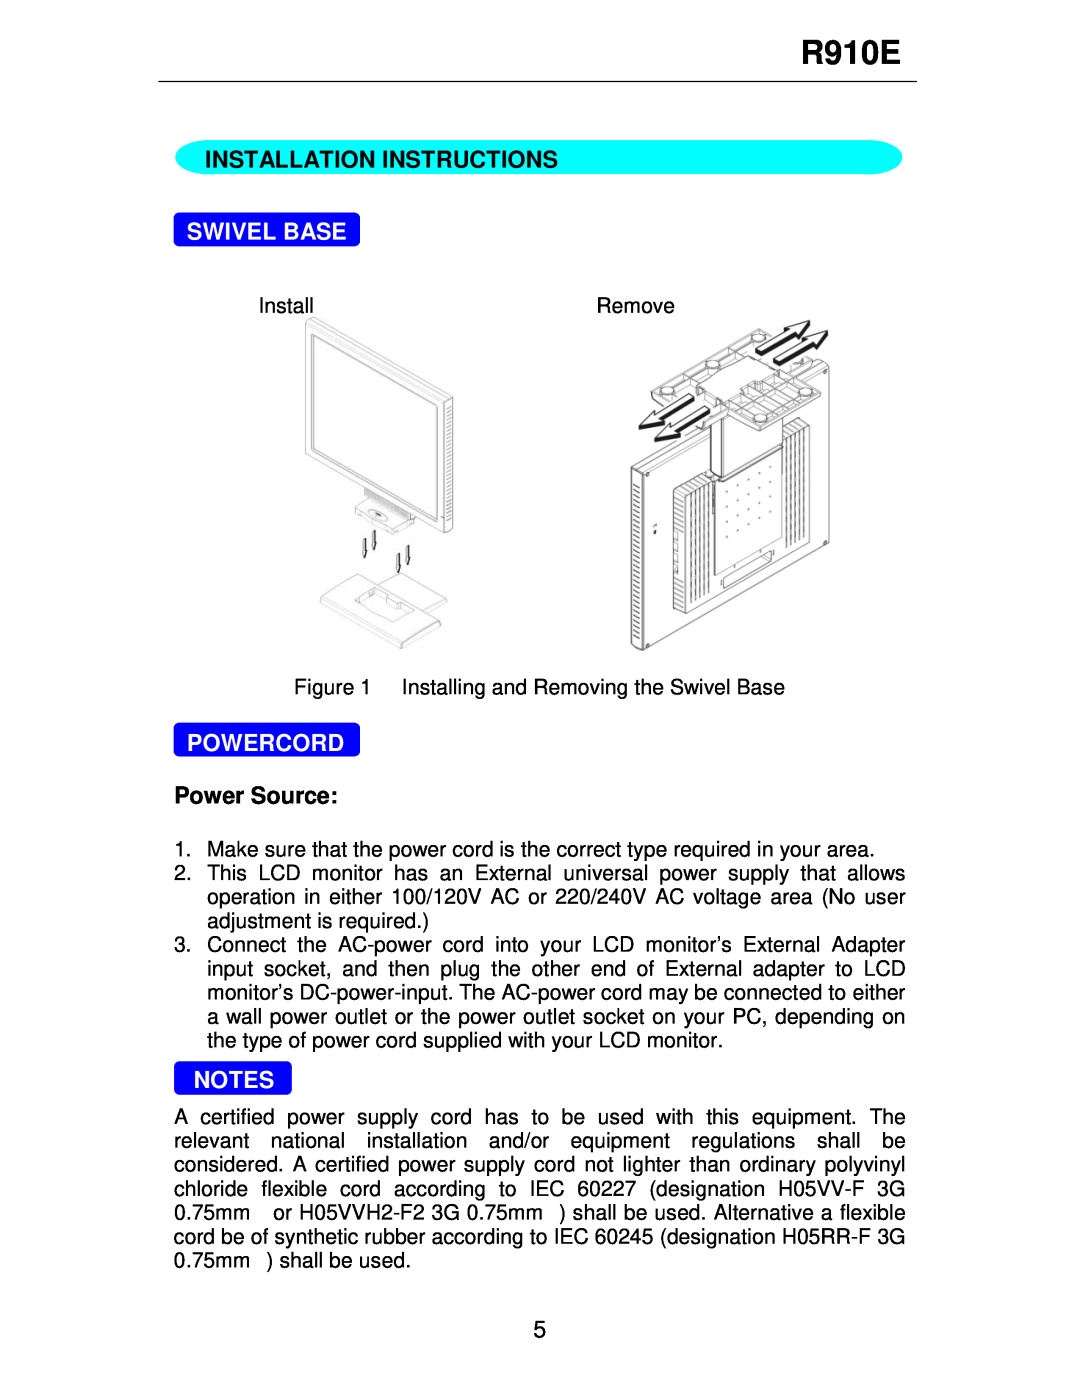 Rosewill R910E user manual Installation Instructions, Swivel Base, Powercord, Power Source 